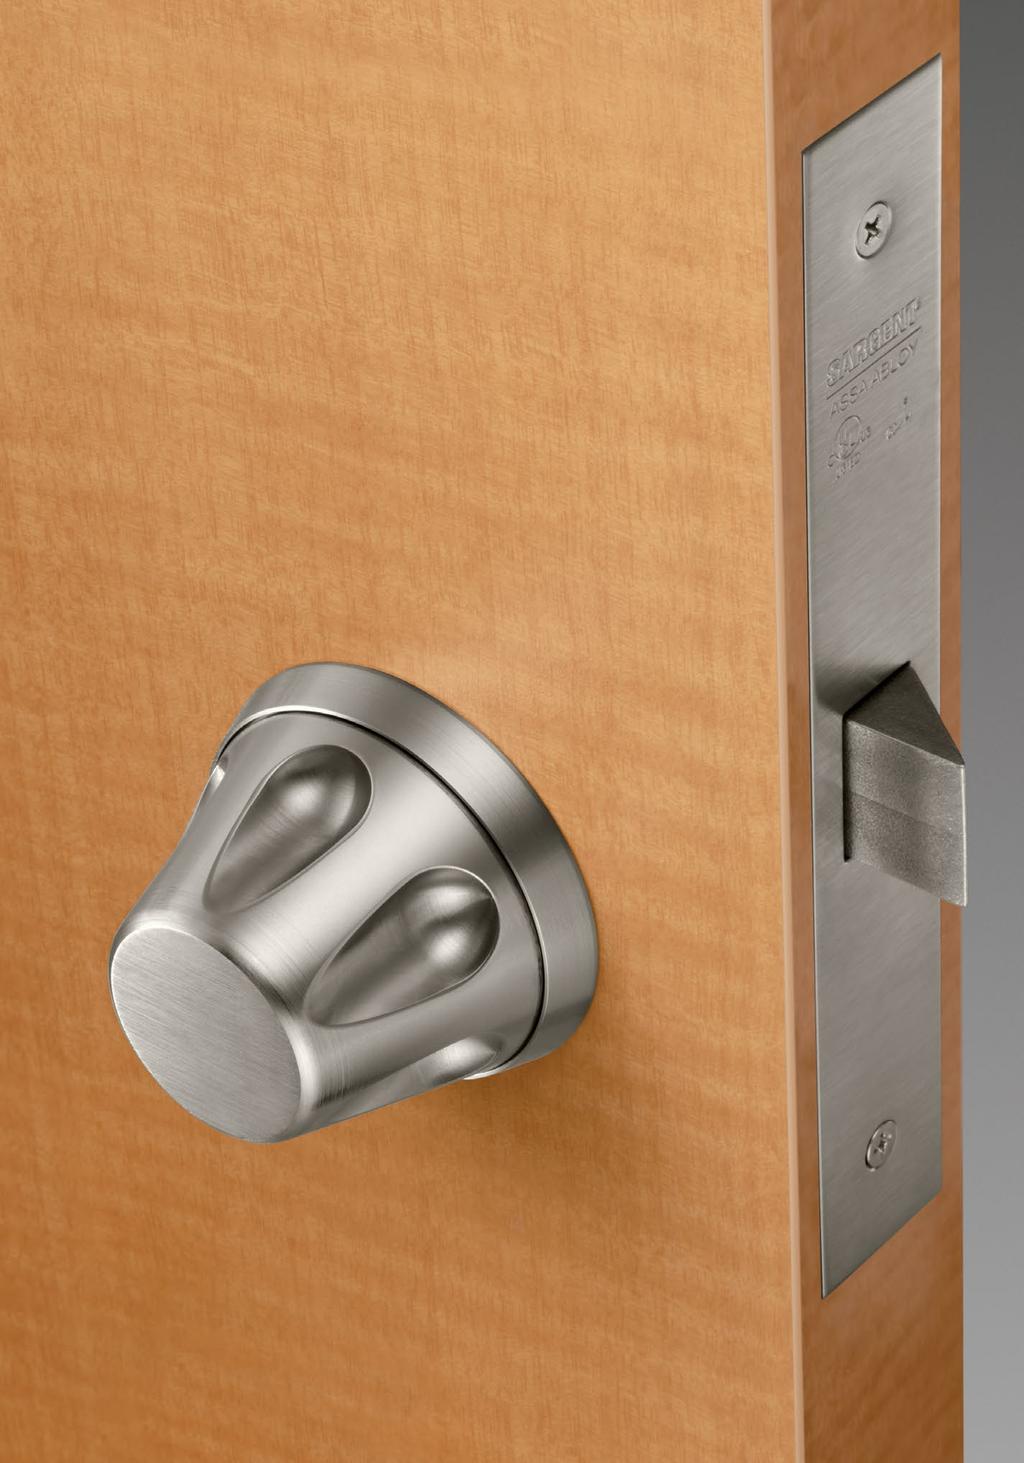 Door Hardware Detention Knob This knob trim is designed for safety and security by eliminating catch points with a tapered knob recessed into the rose.